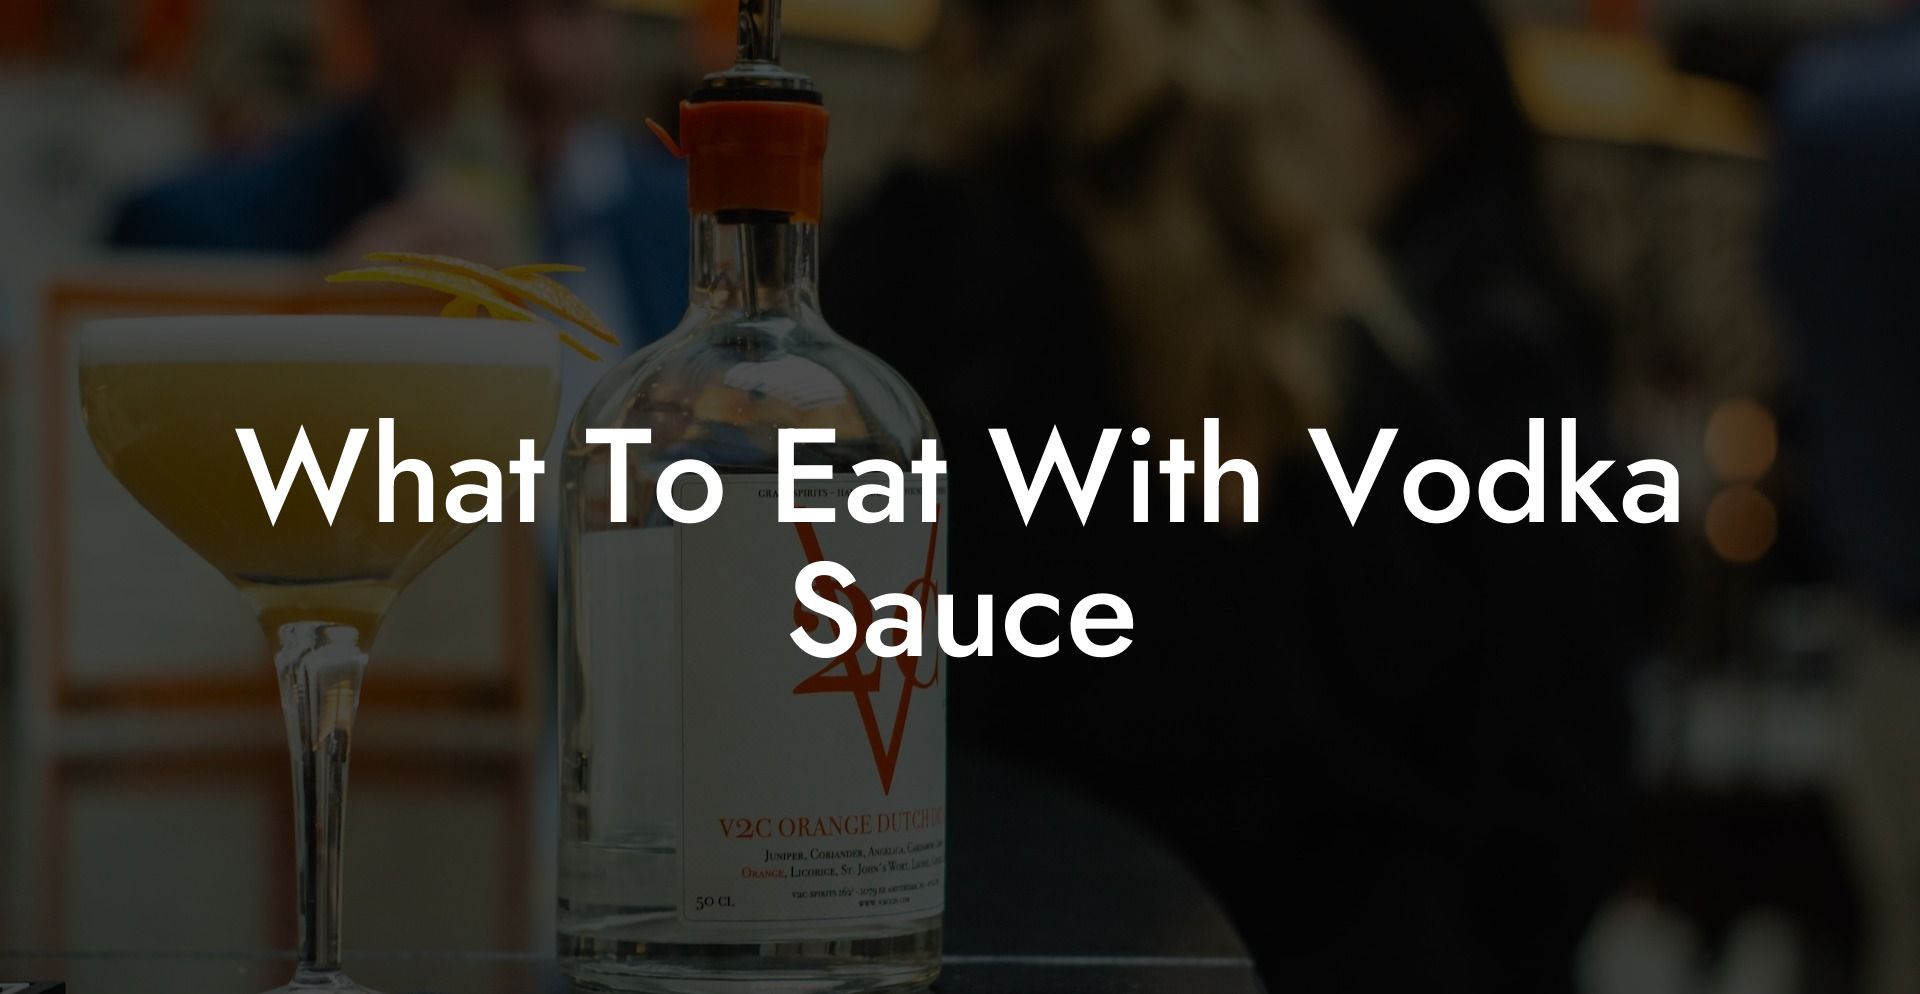 What To Eat With Vodka Sauce